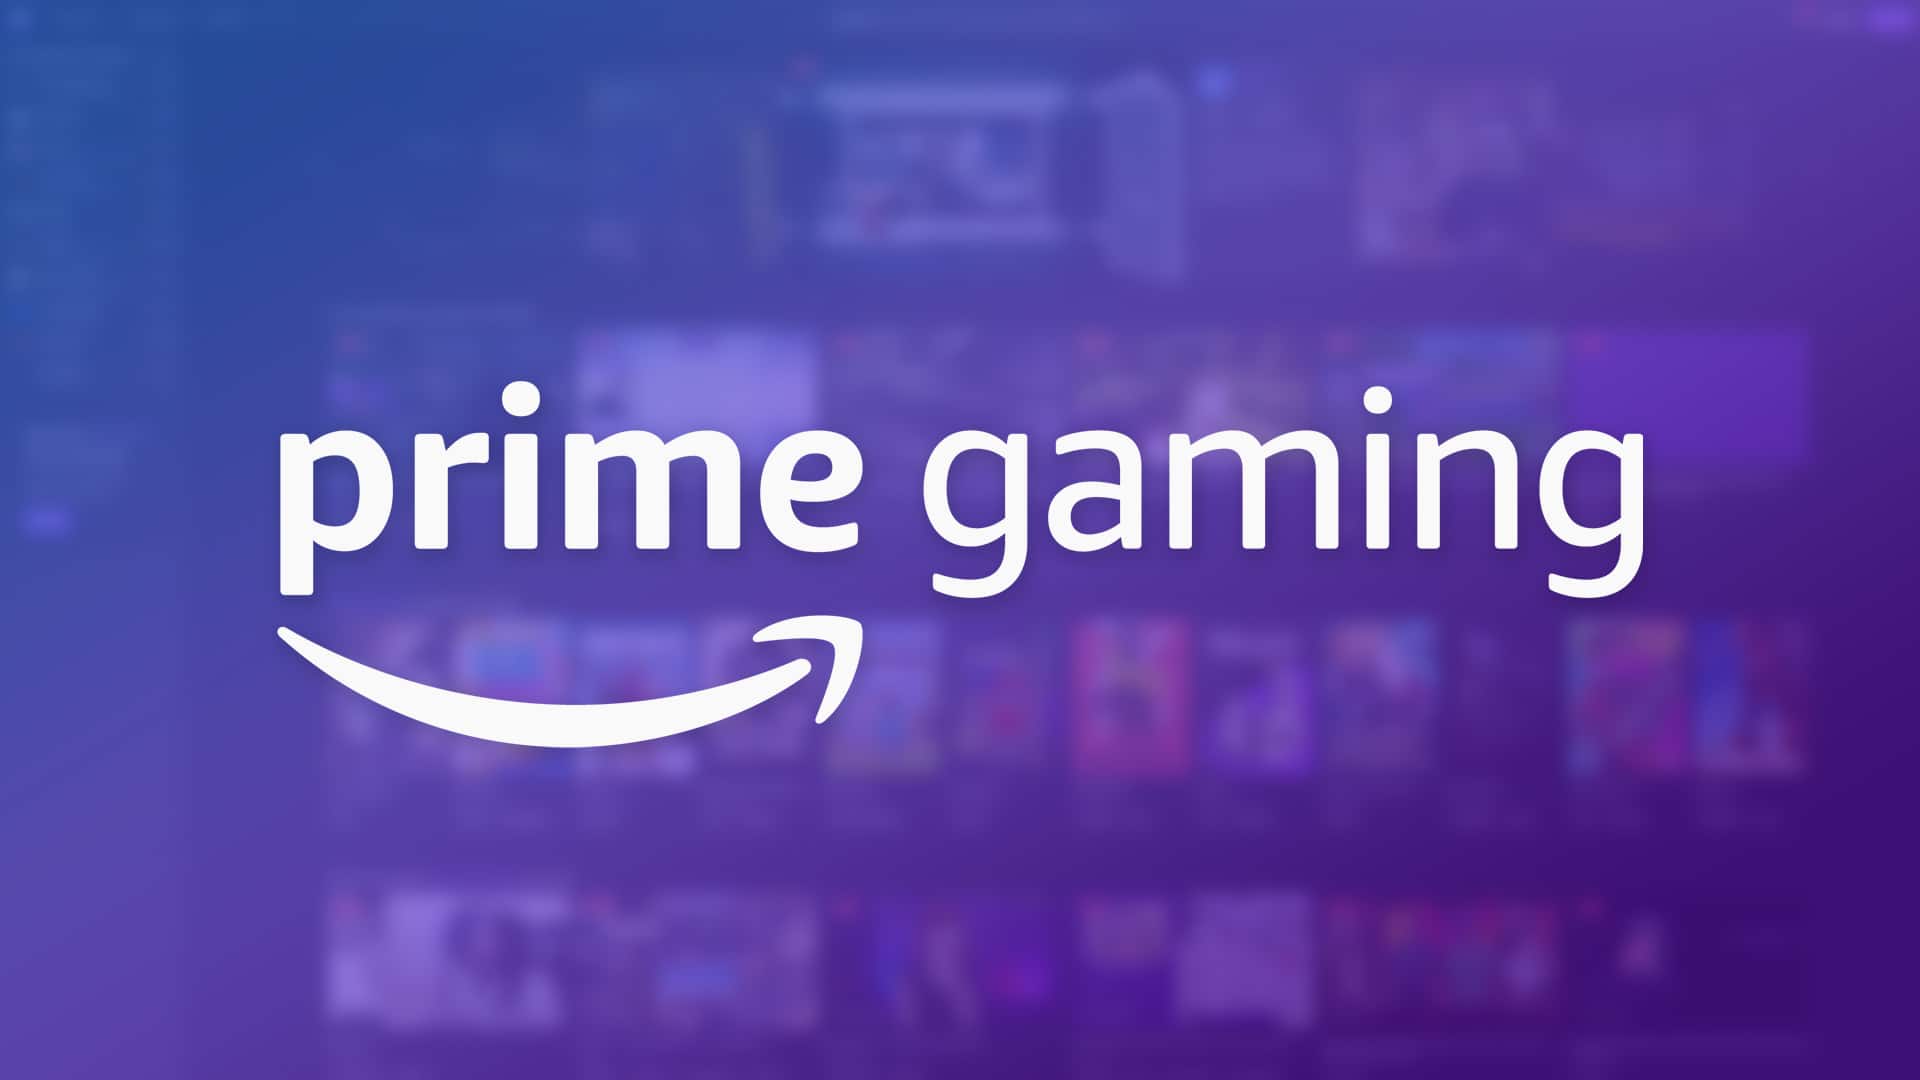 Prime Gaming March 2023: All Free Games and Rewards